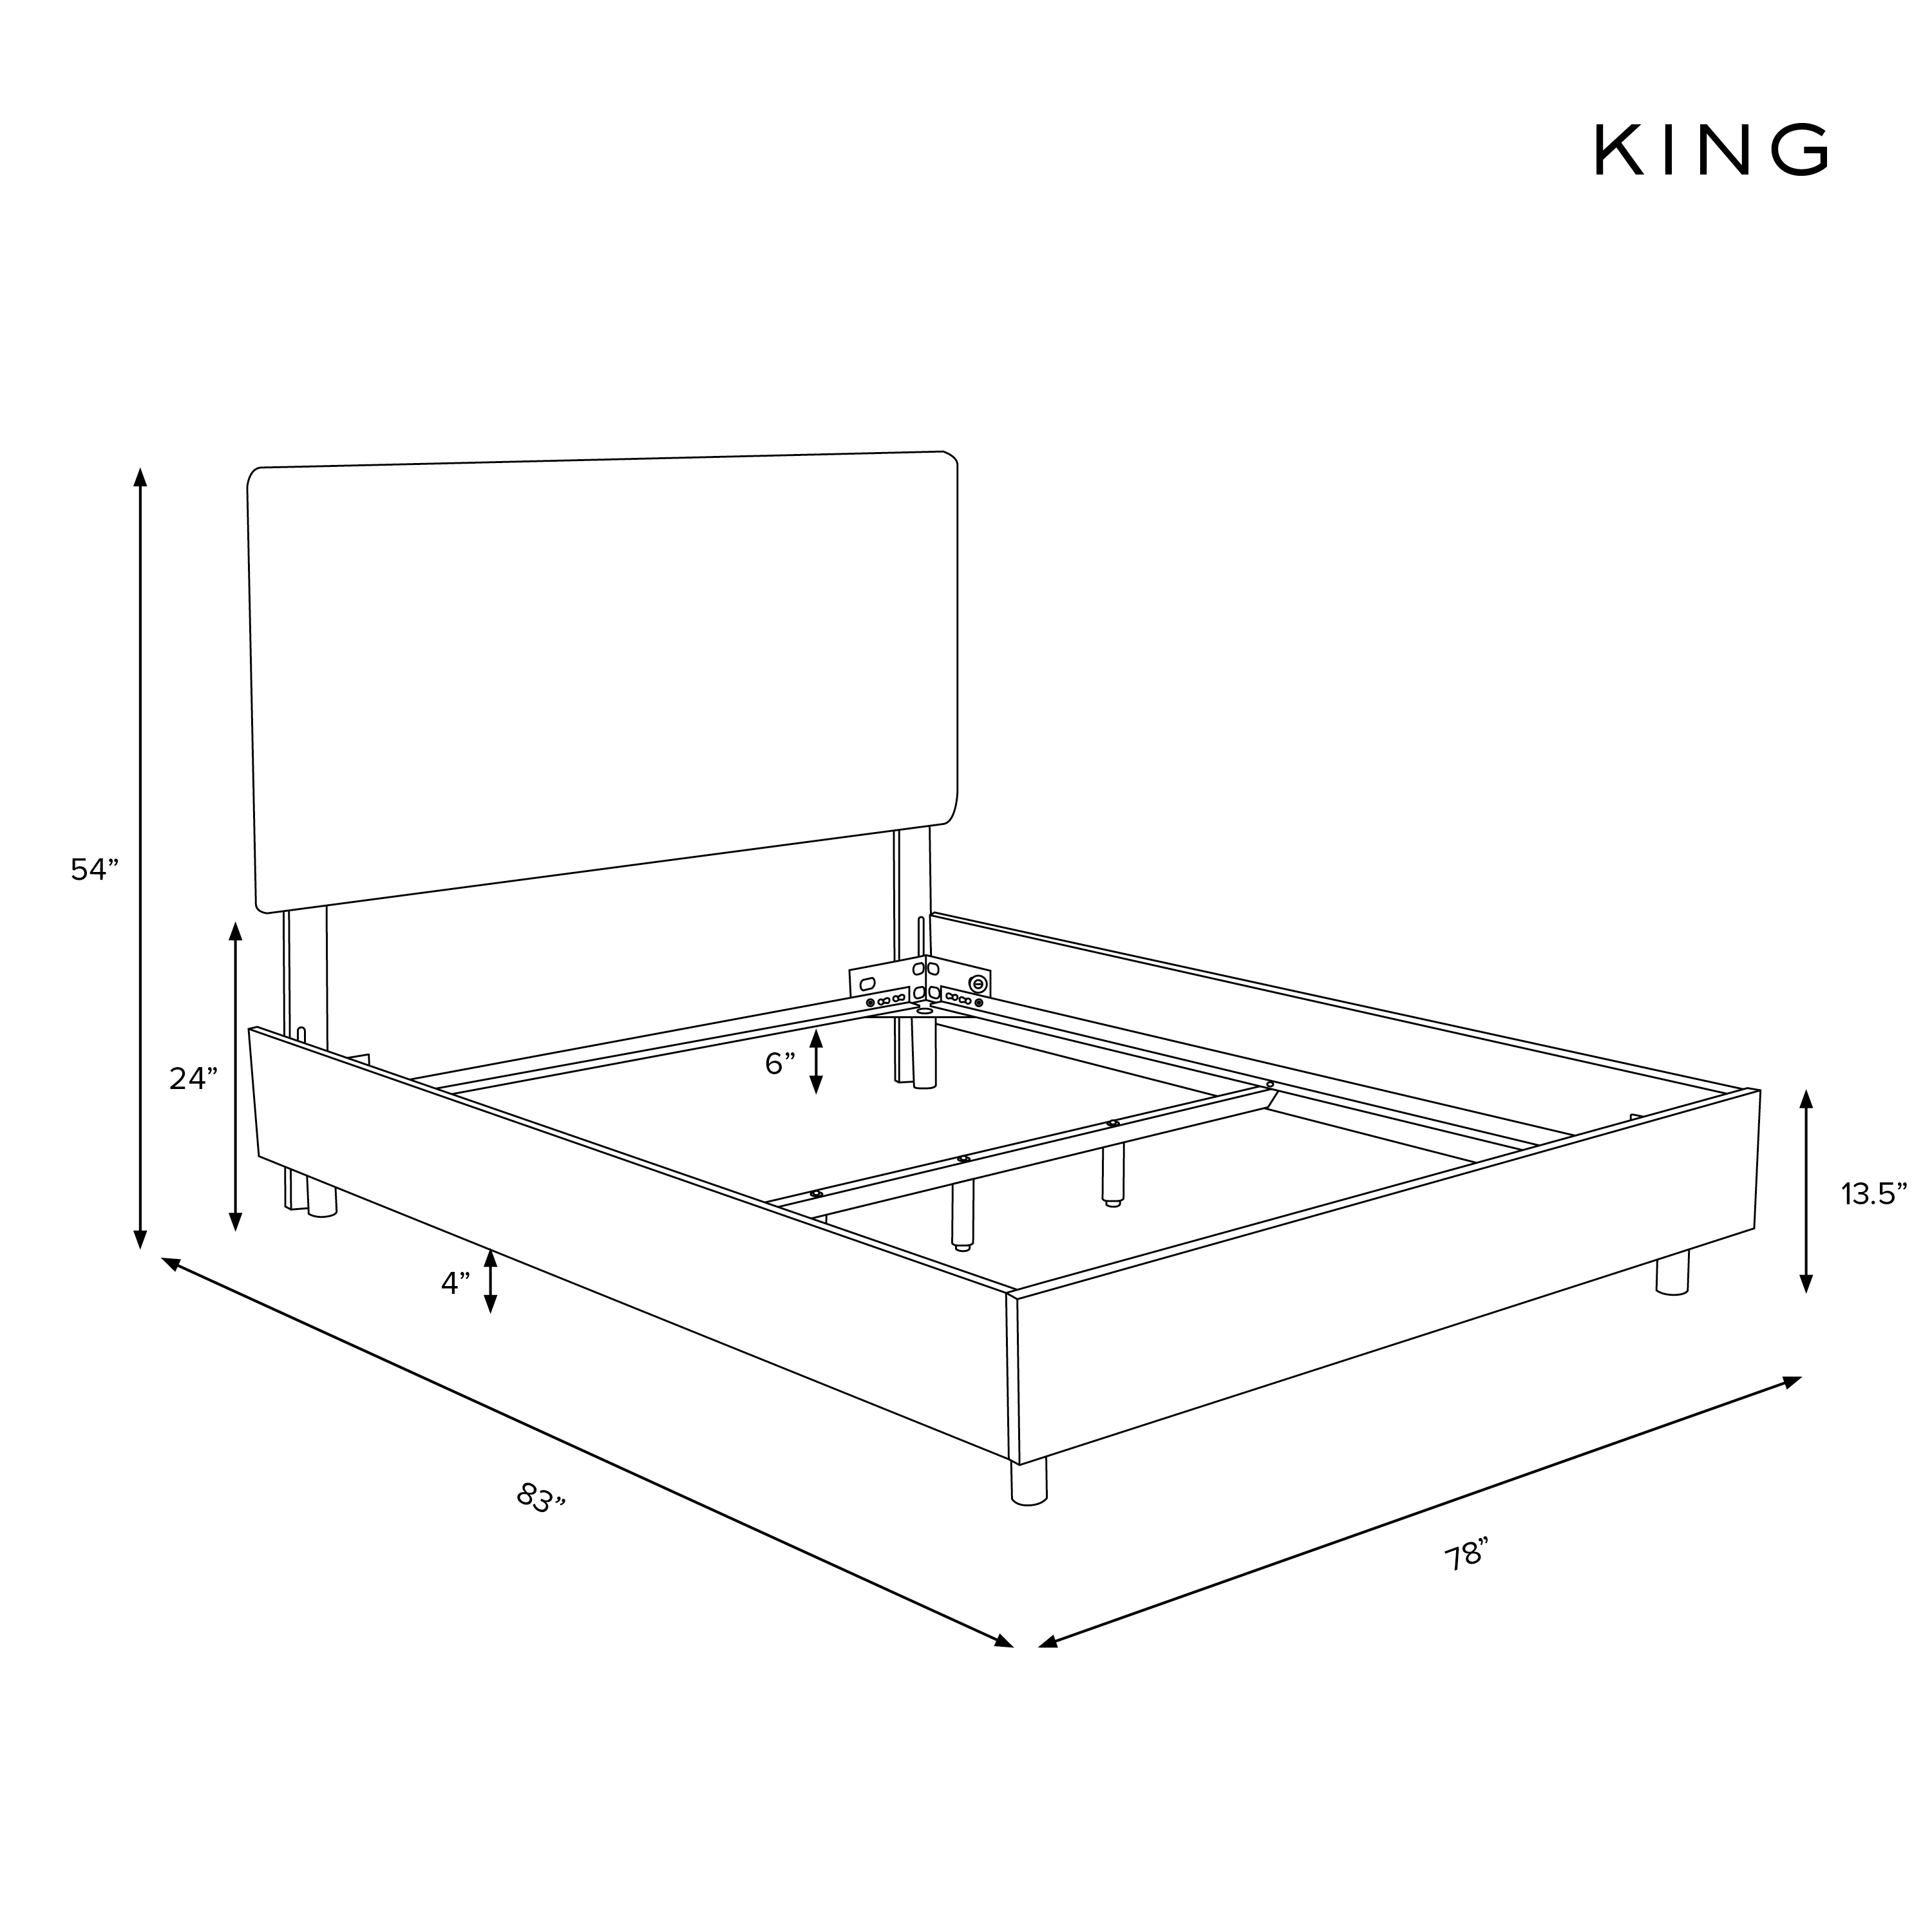 Lafayette Bed, King, Pumice - Image 5